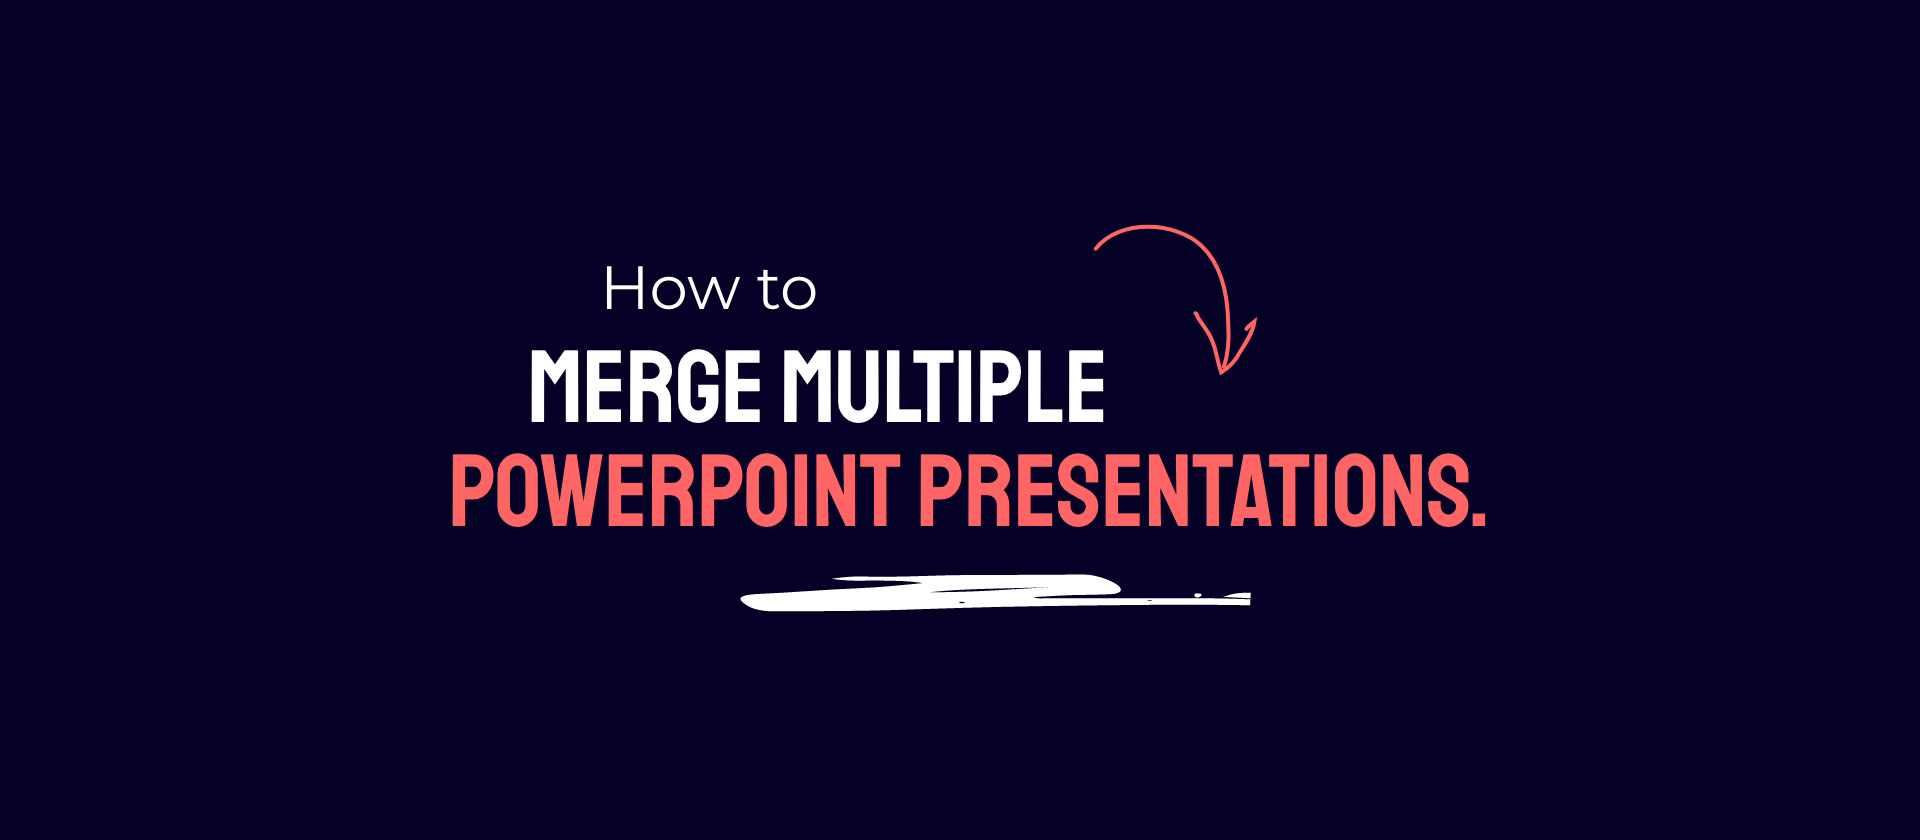 How to merge multiple PowerPoint presentations.